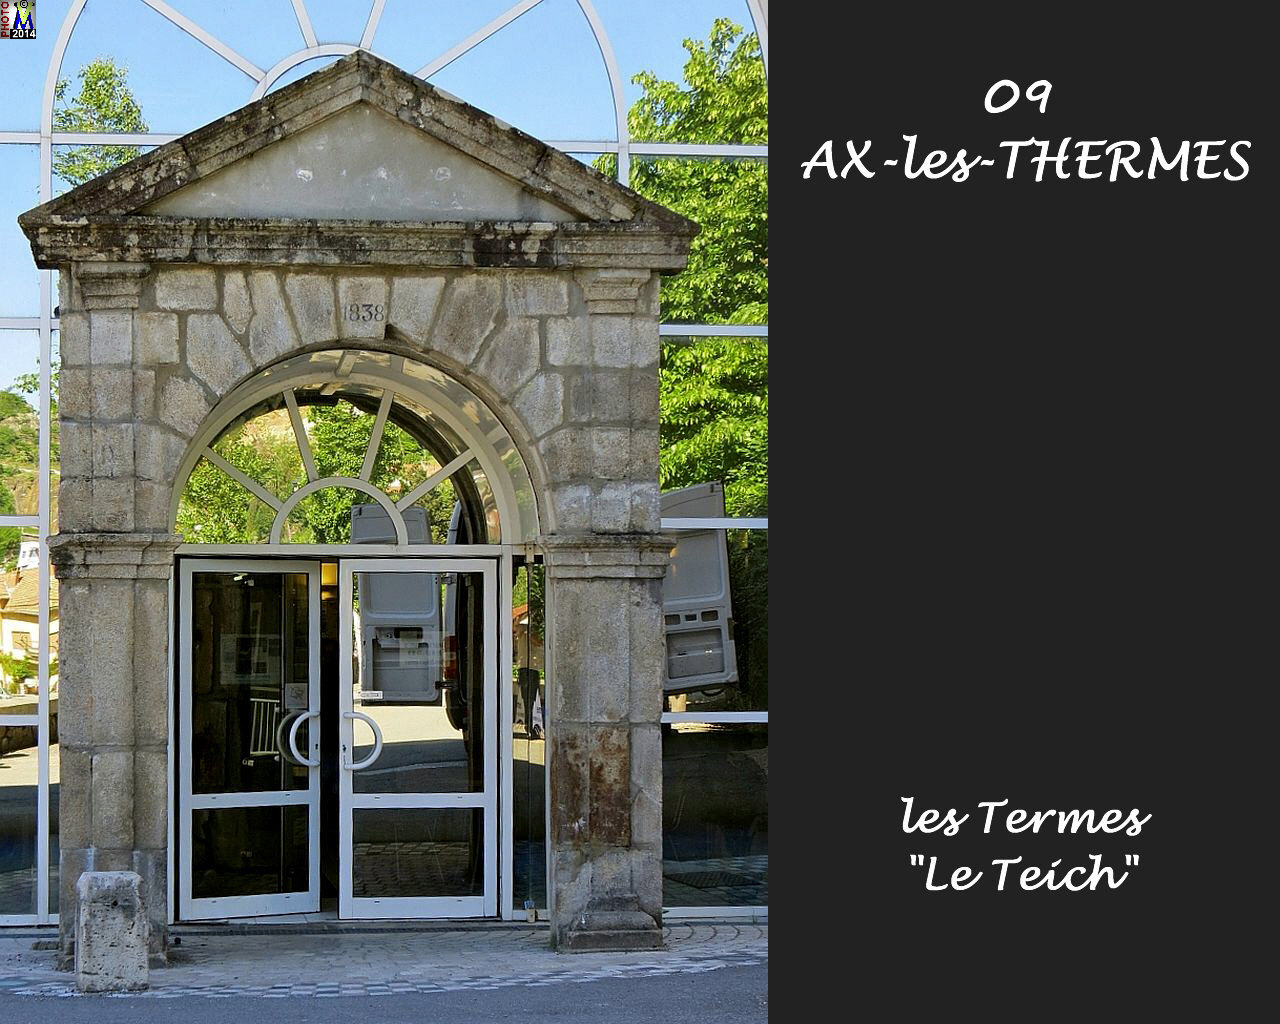 09AX-THERMES_ThermesT_102.jpg